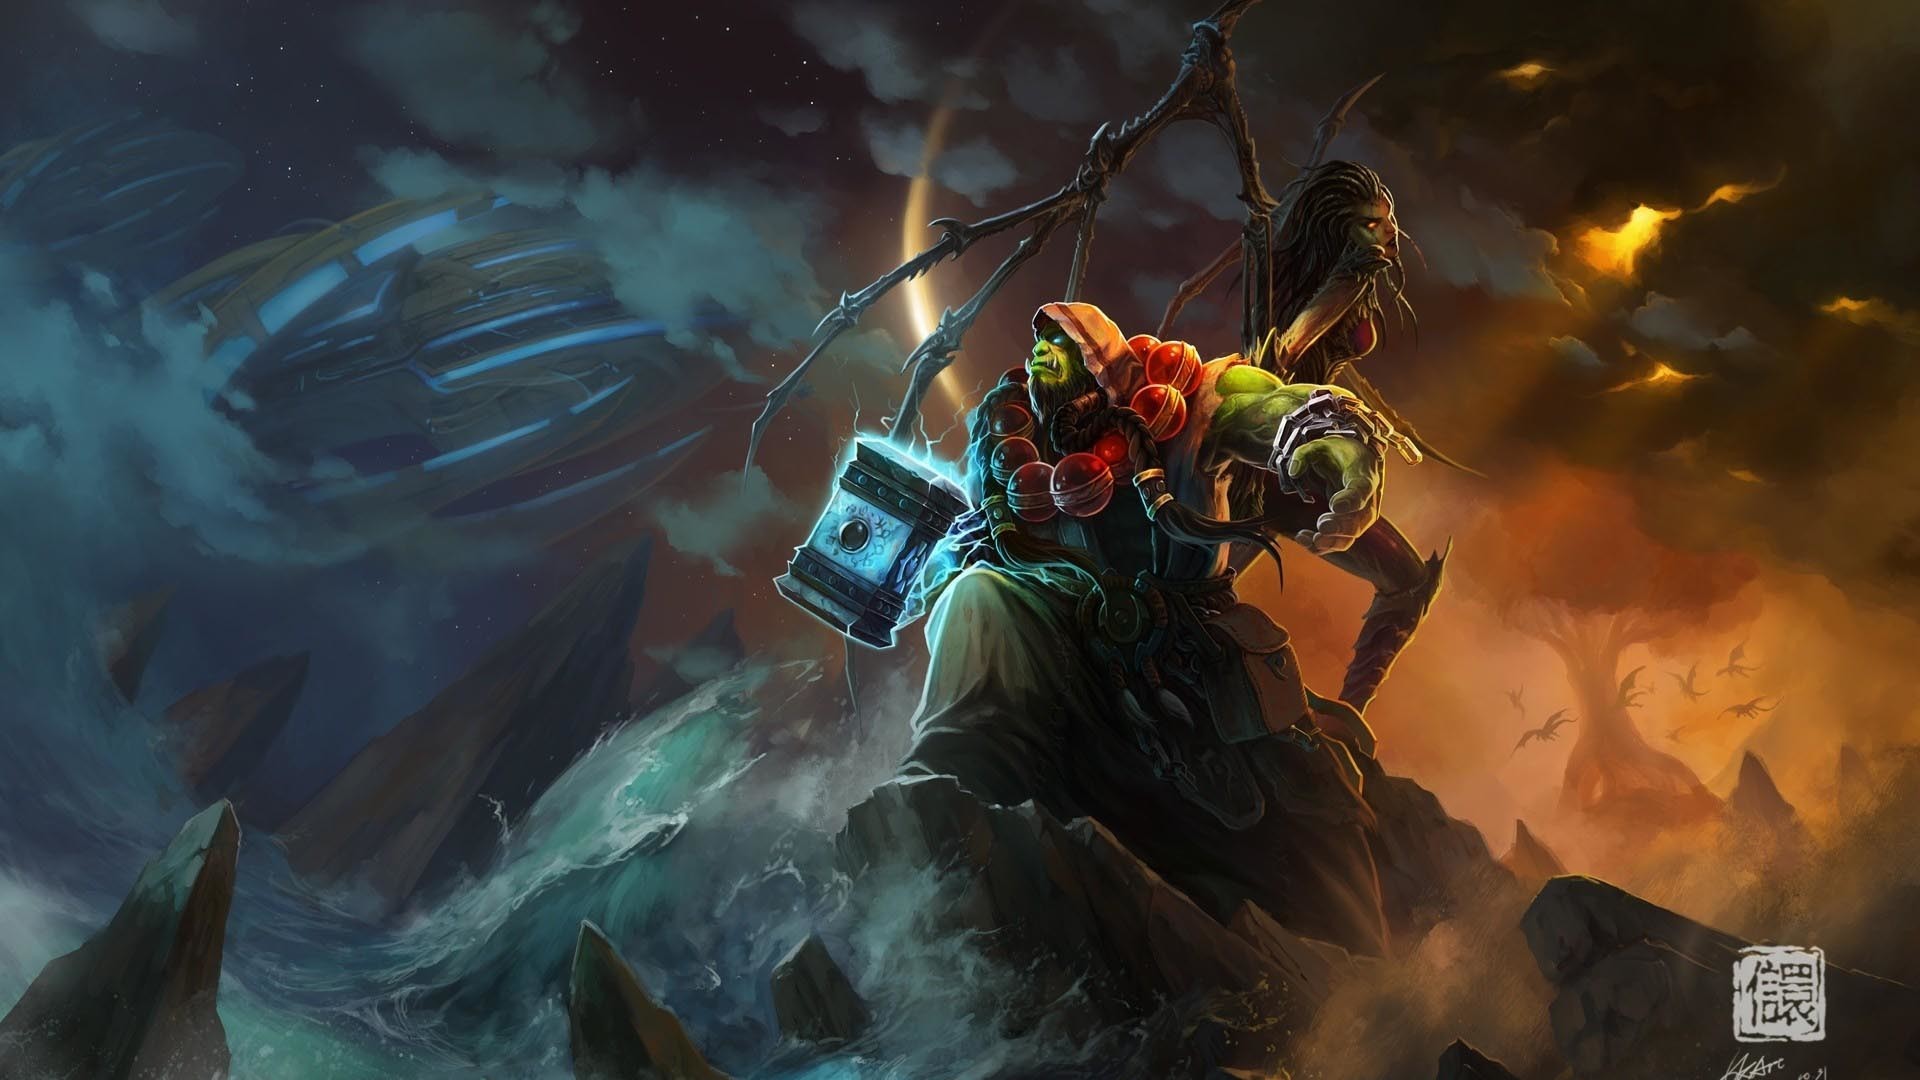 1920x1080 World of Warcraft Ocean Shaman Wallpaper. Really nice World of Warcraft  wallpaper featuring a couple of characters readying themselves for battle.